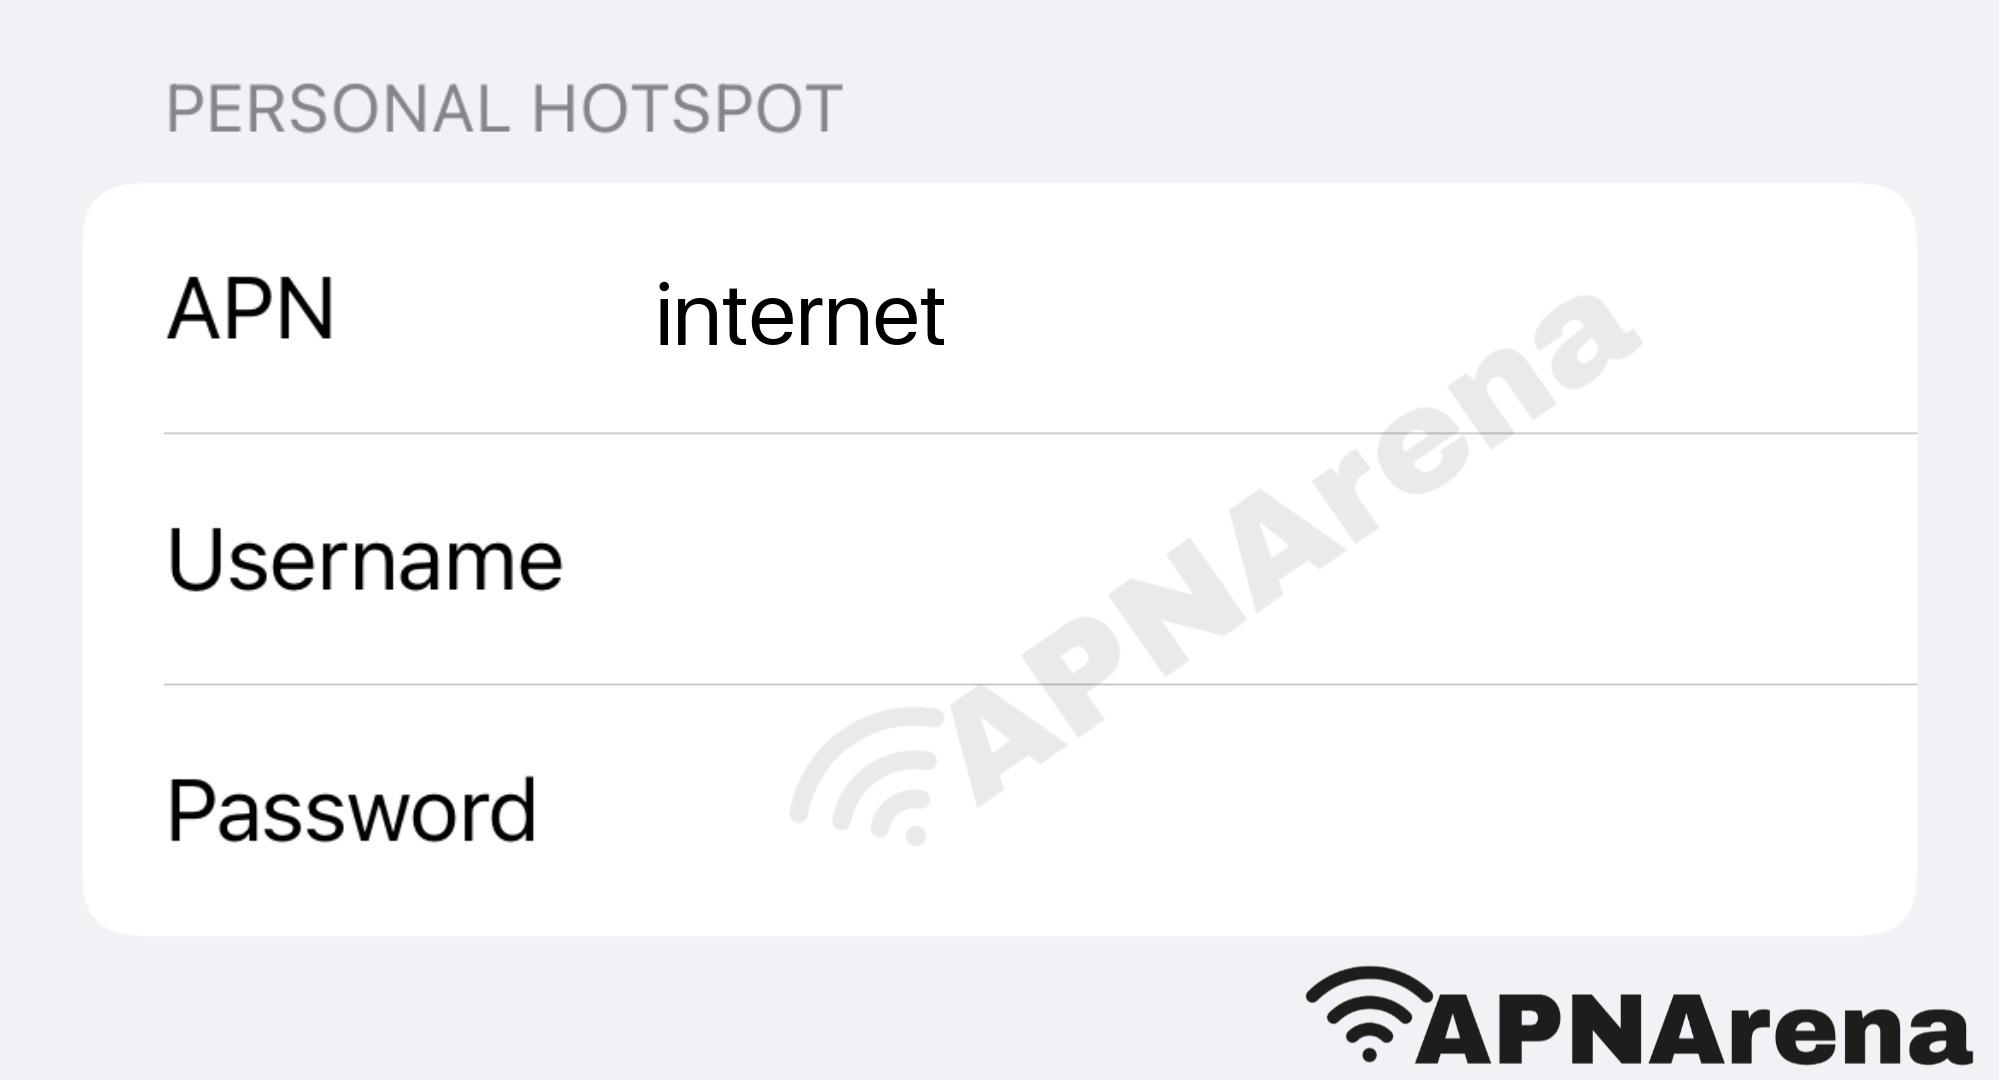 Flow Turks and Caicos Islands Personal Hotspot Settings for iPhone